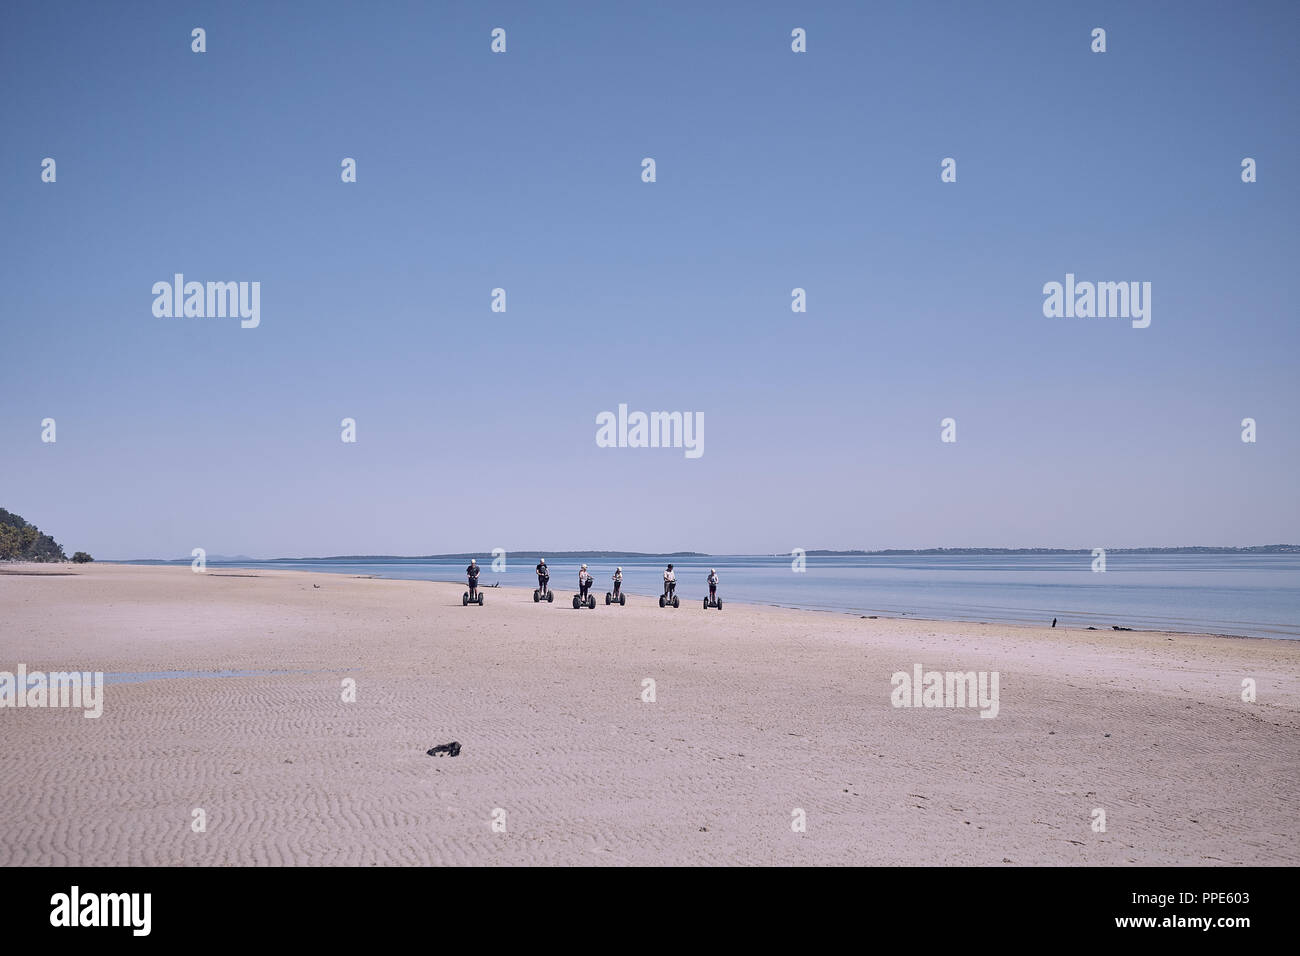 Segway users on the beach at Fraser Island, Queensland, Australia Stock Photo